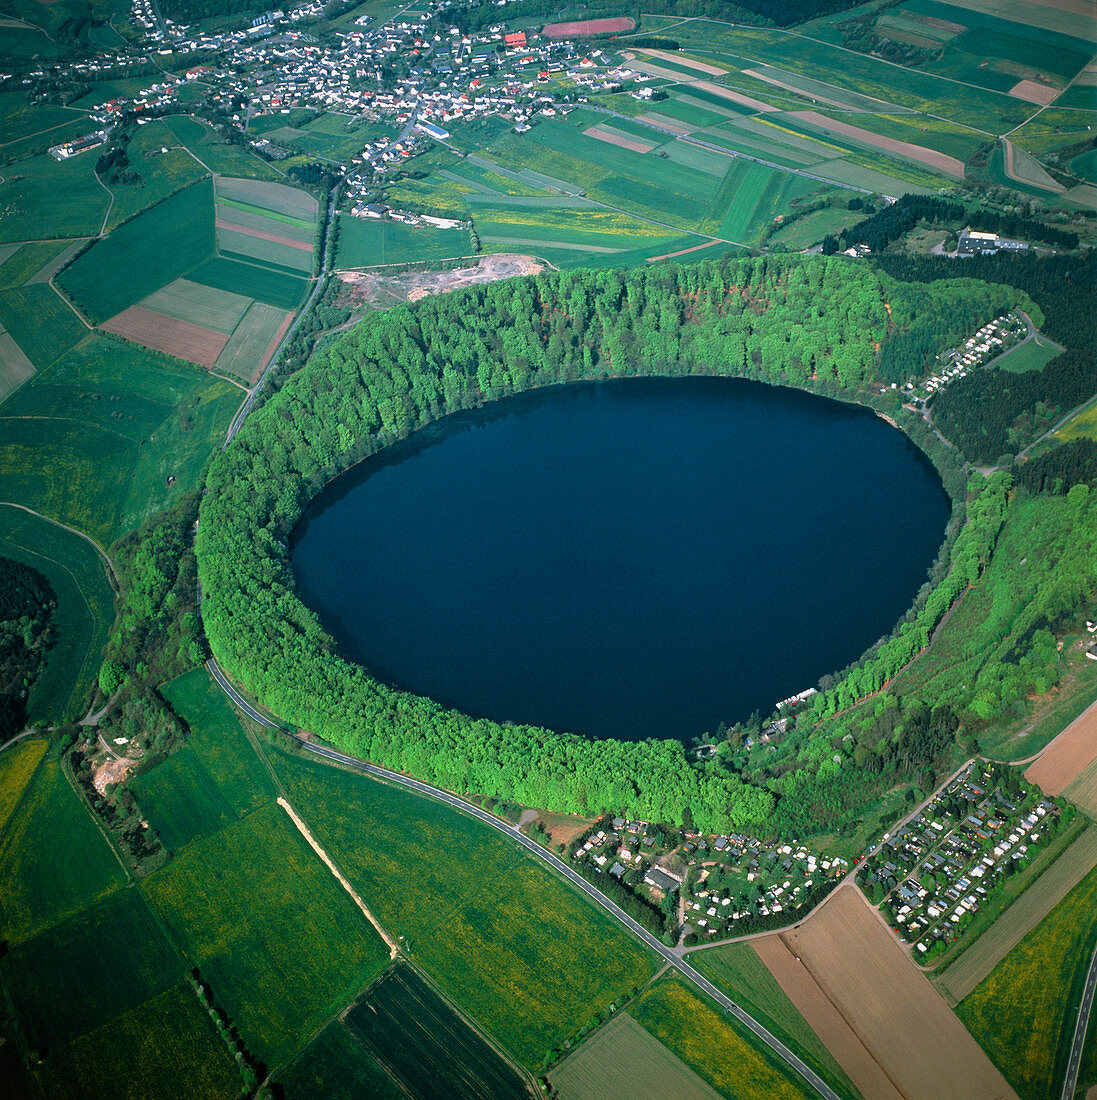 View of the Pulvermaar lake in an extinct crater